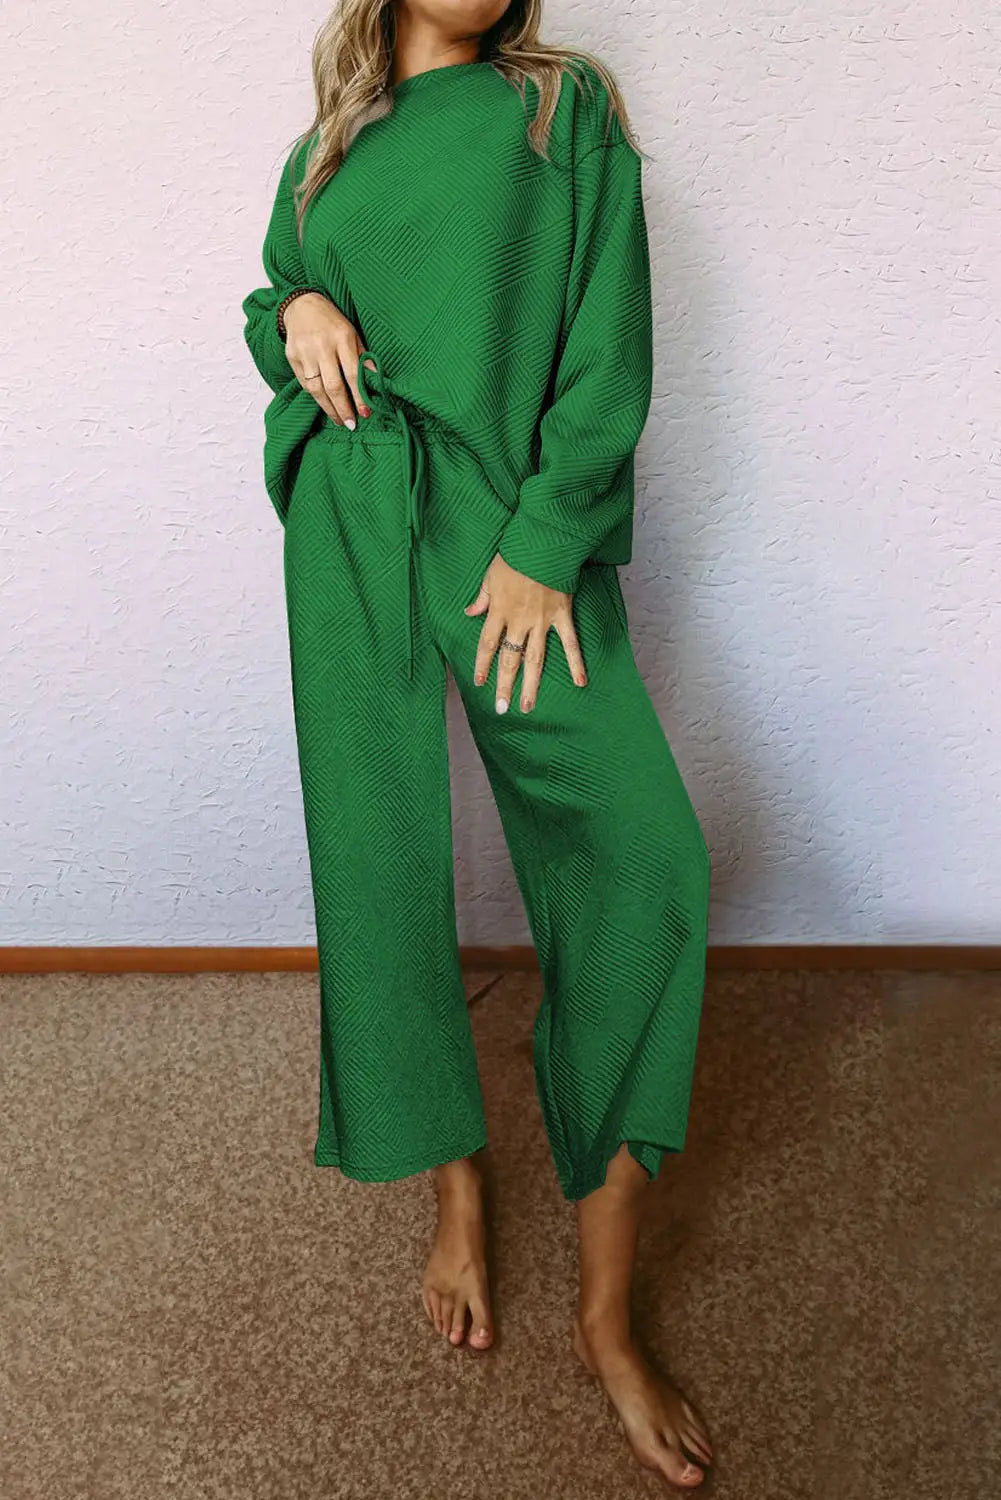 Dark green ultra loose textured 2pcs slouchy outfit - 2xl / 95% polyester + 5% elastane - pants sets